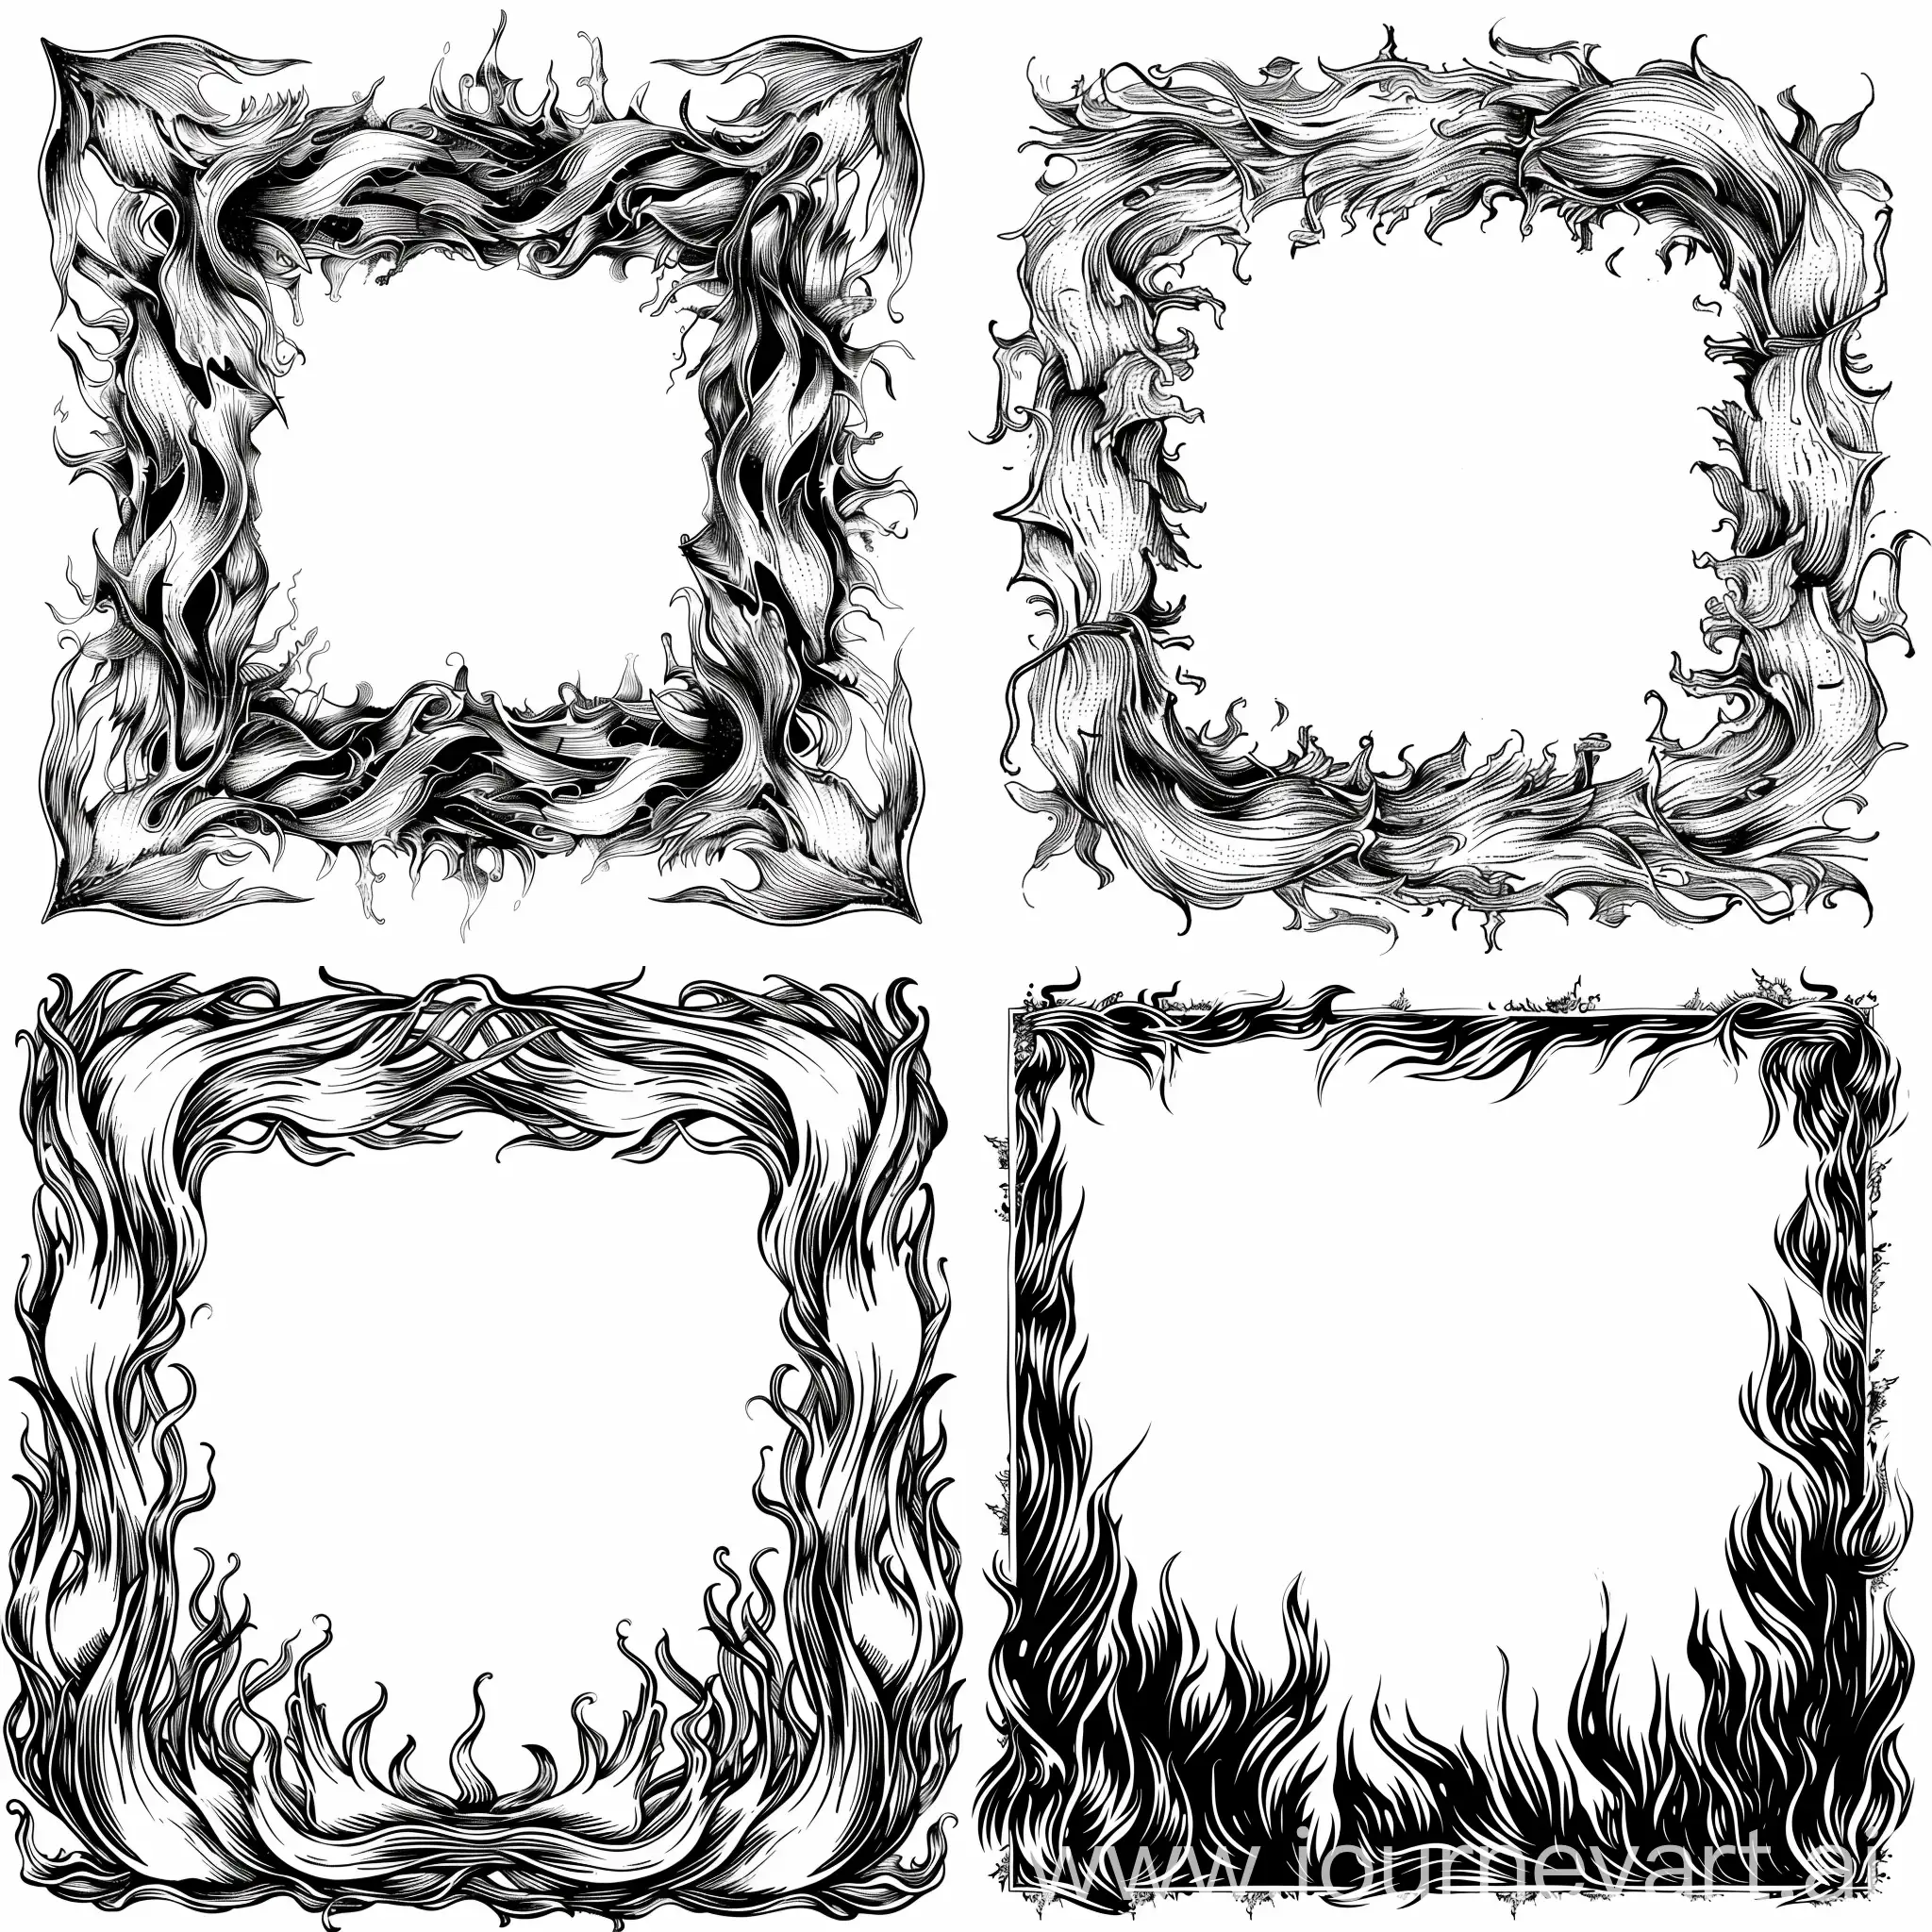 Flame square web image frame, vector, black and
white, outside frame additonal 3-inch spacing,
white background